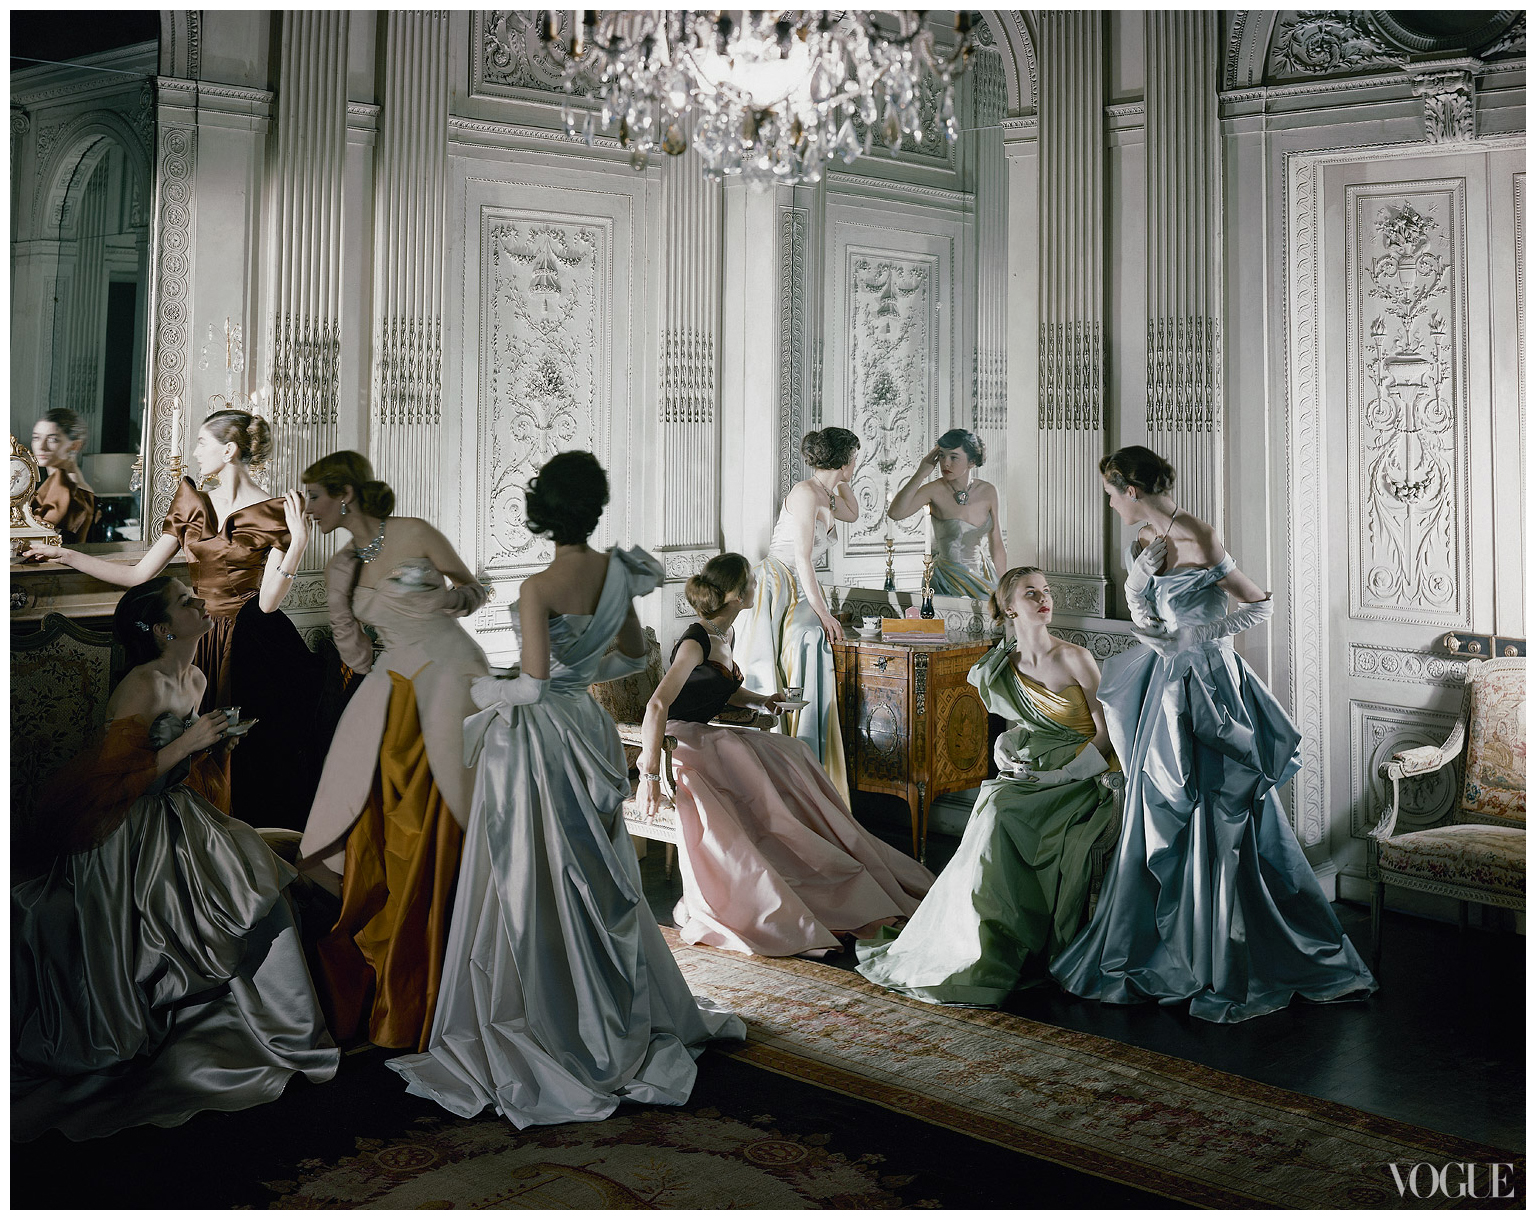 Charles James, Dresses, photographed by Cecil Beaton, 1948.jpg